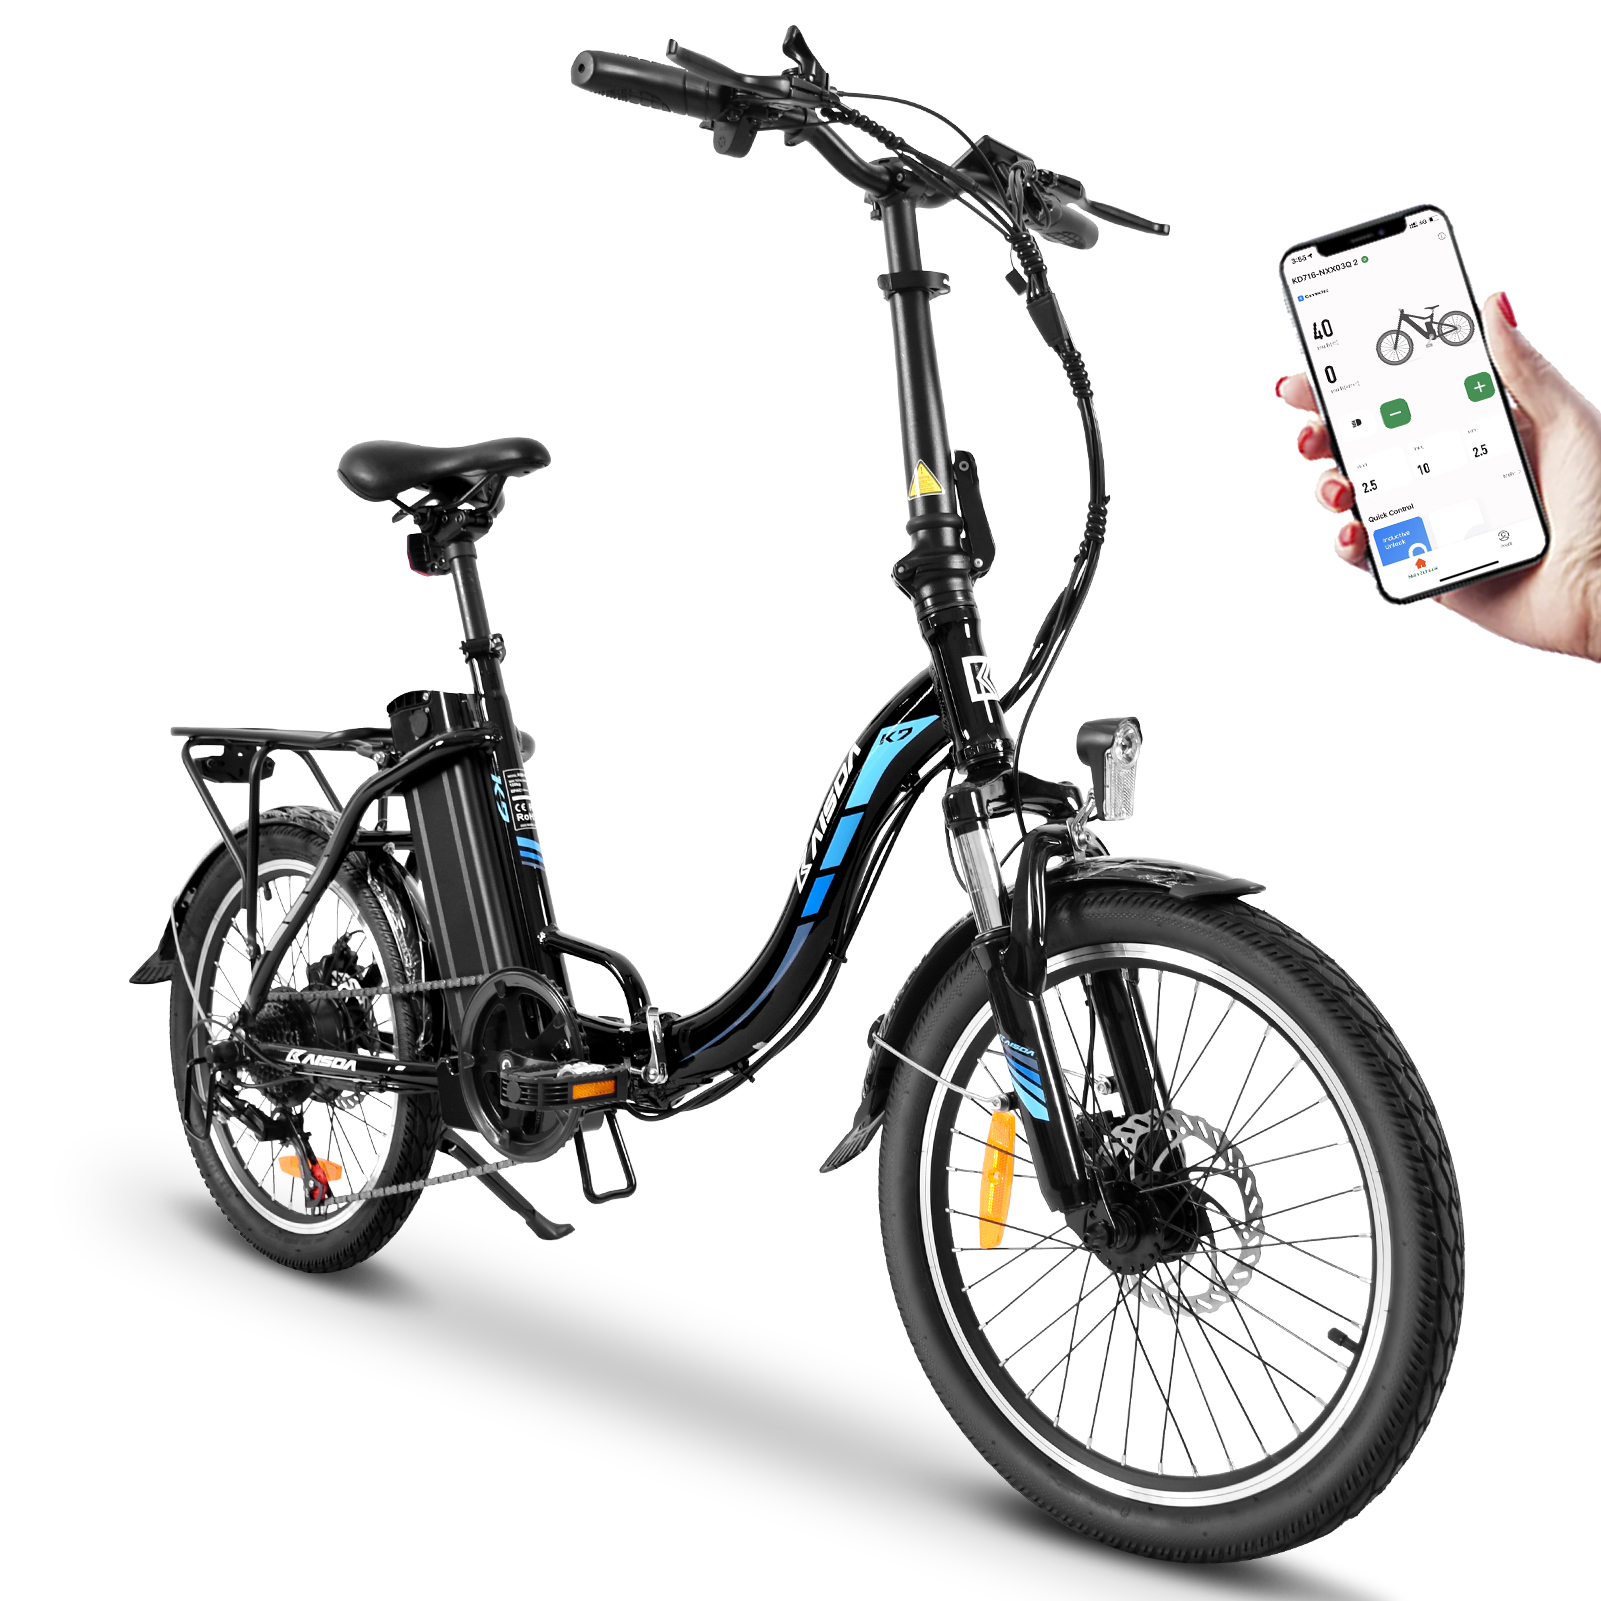 Find EU Direct KAISDA K7 36V 12 5AH 350W 20inch Electric Bicycle Disc Brake 45 75KM Mileage 120KG Payload Electric Bike for Sale on Gipsybee.com with cryptocurrencies